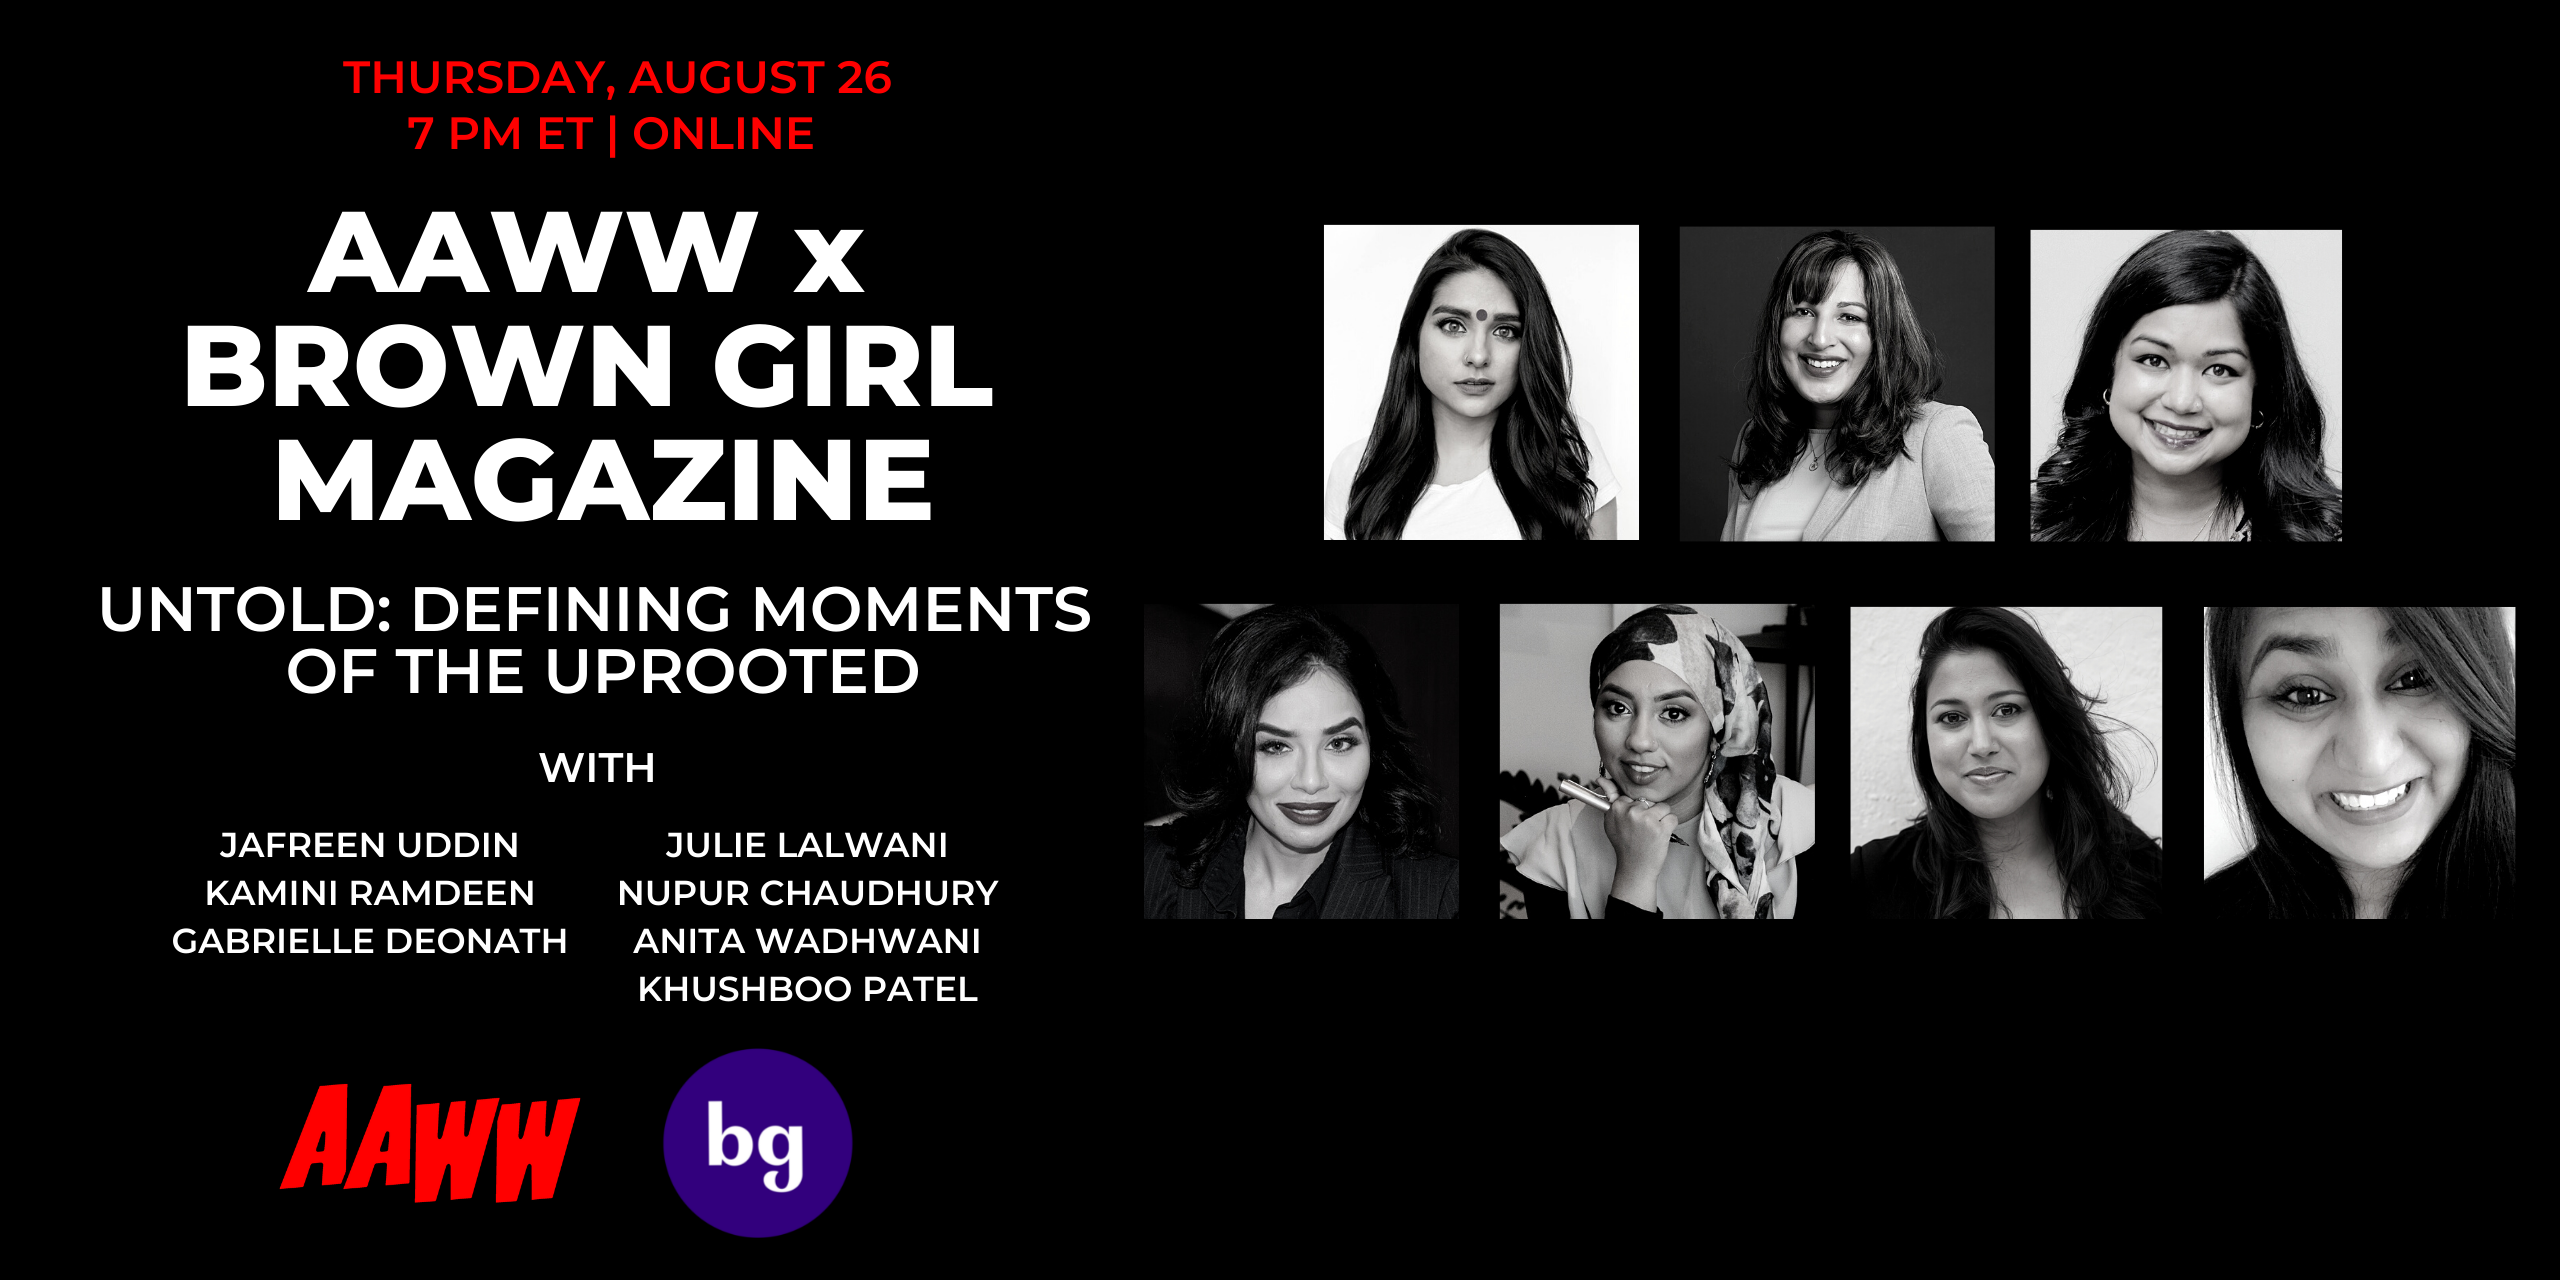 AAWW x Brown Girl Magazine: untold: defining moments of the uprooted